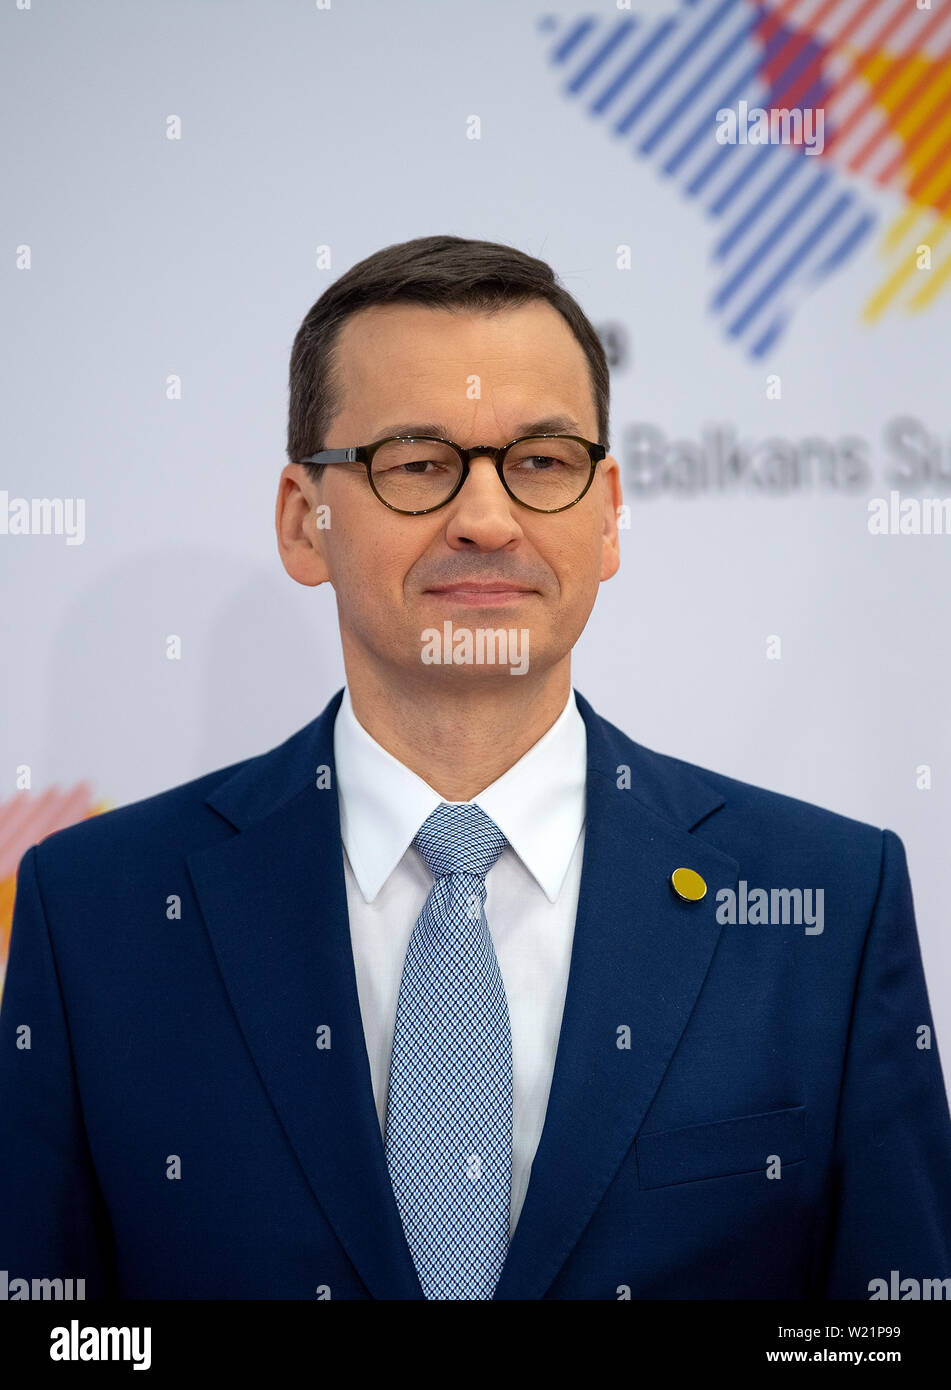 Poznan, Poland. 05th July, 2019. Mateusz Morawiecki, Prime Minister of Poland, awaits the arrival of the delegation members at the Western Balkans Summit. The aim of the Summit is to assist the Balkan countries on their way to possible future membership of the European Union. Credit: Monika Skolimowska/dpa-Zentralbild/dpa/Alamy Live News Stock Photo